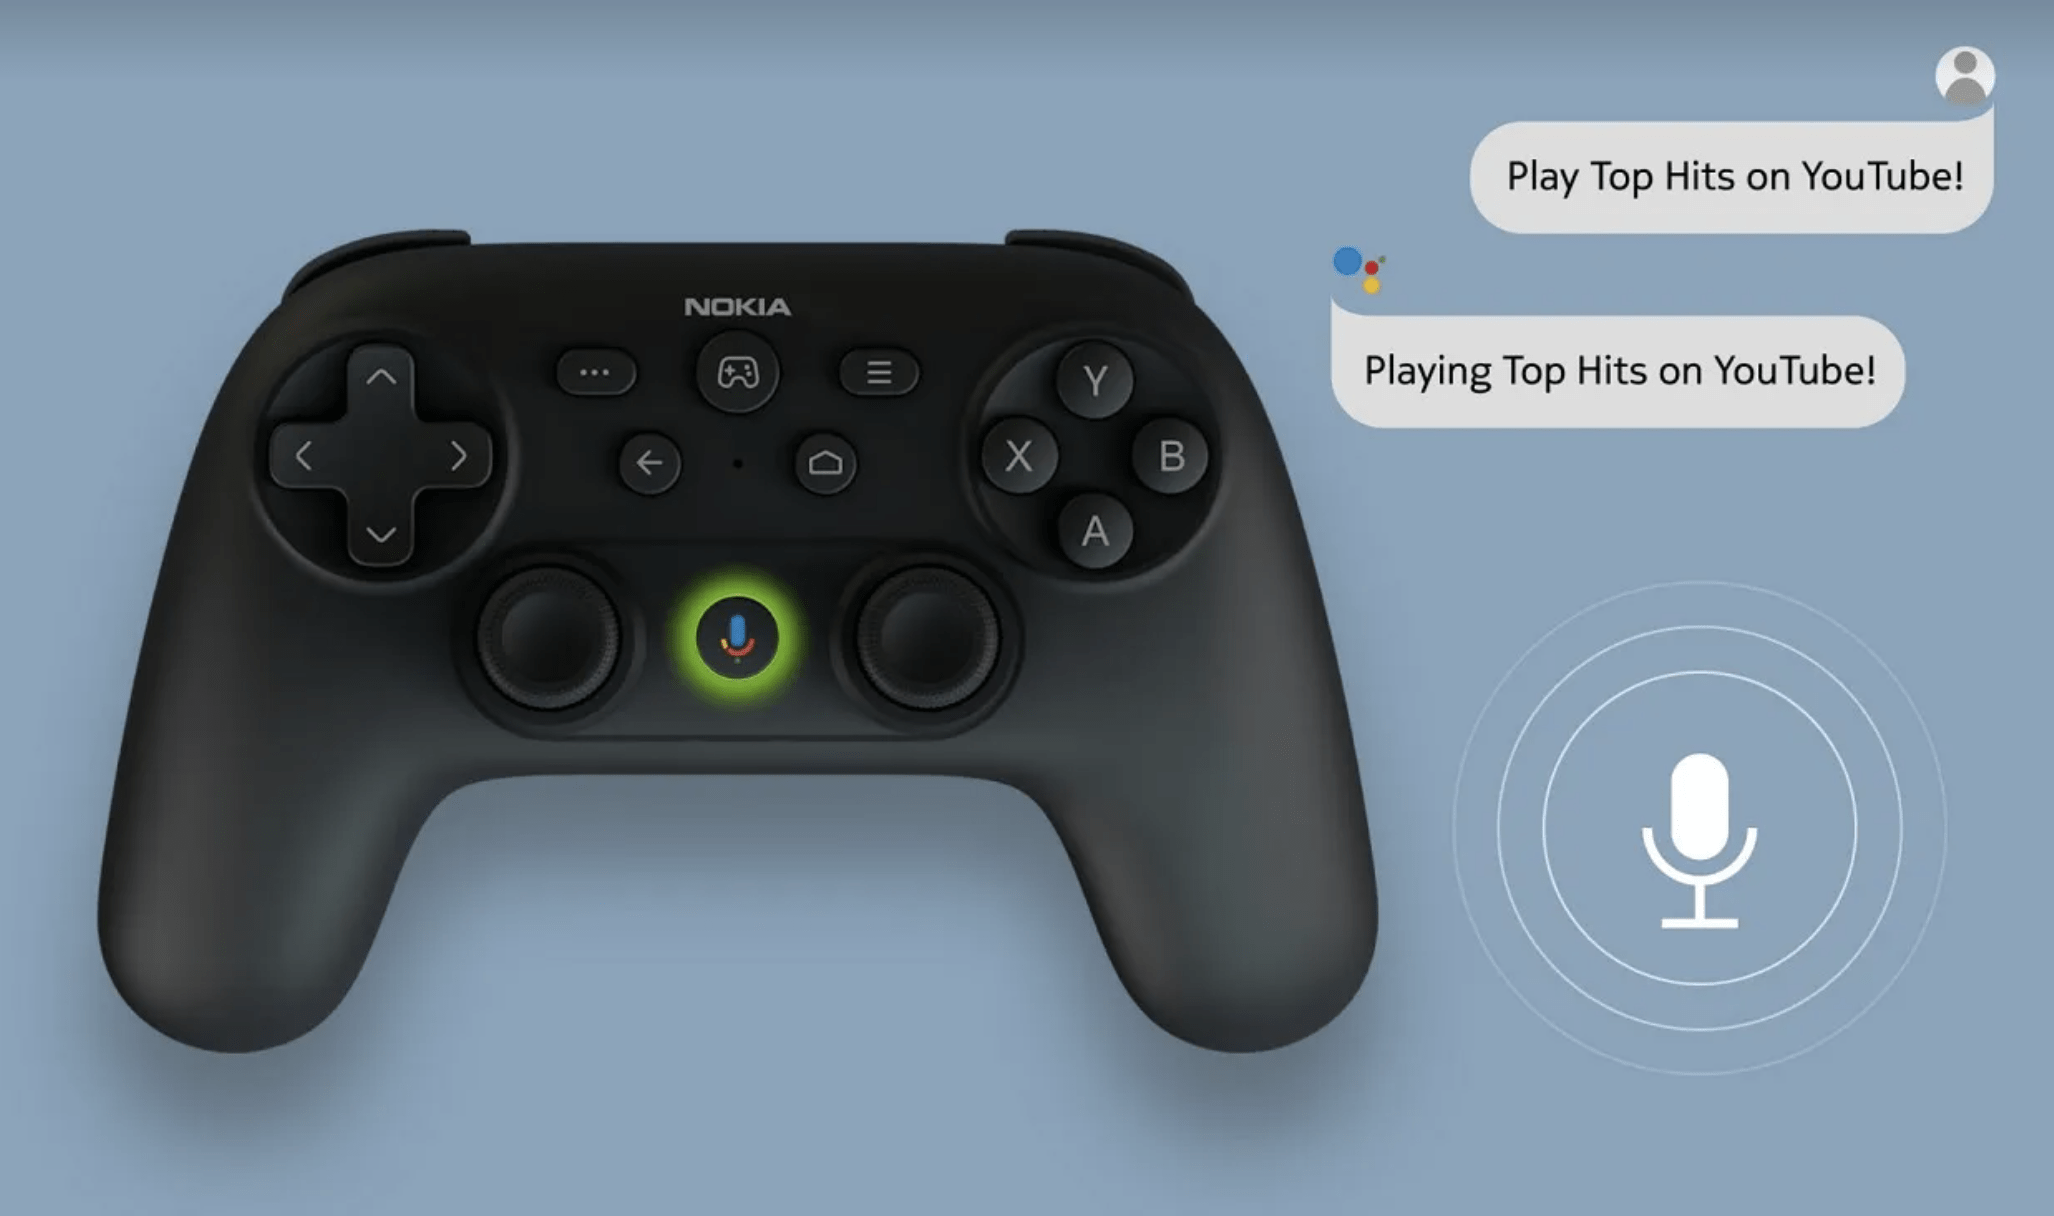 Nokia's Product Item is a Video game Controller